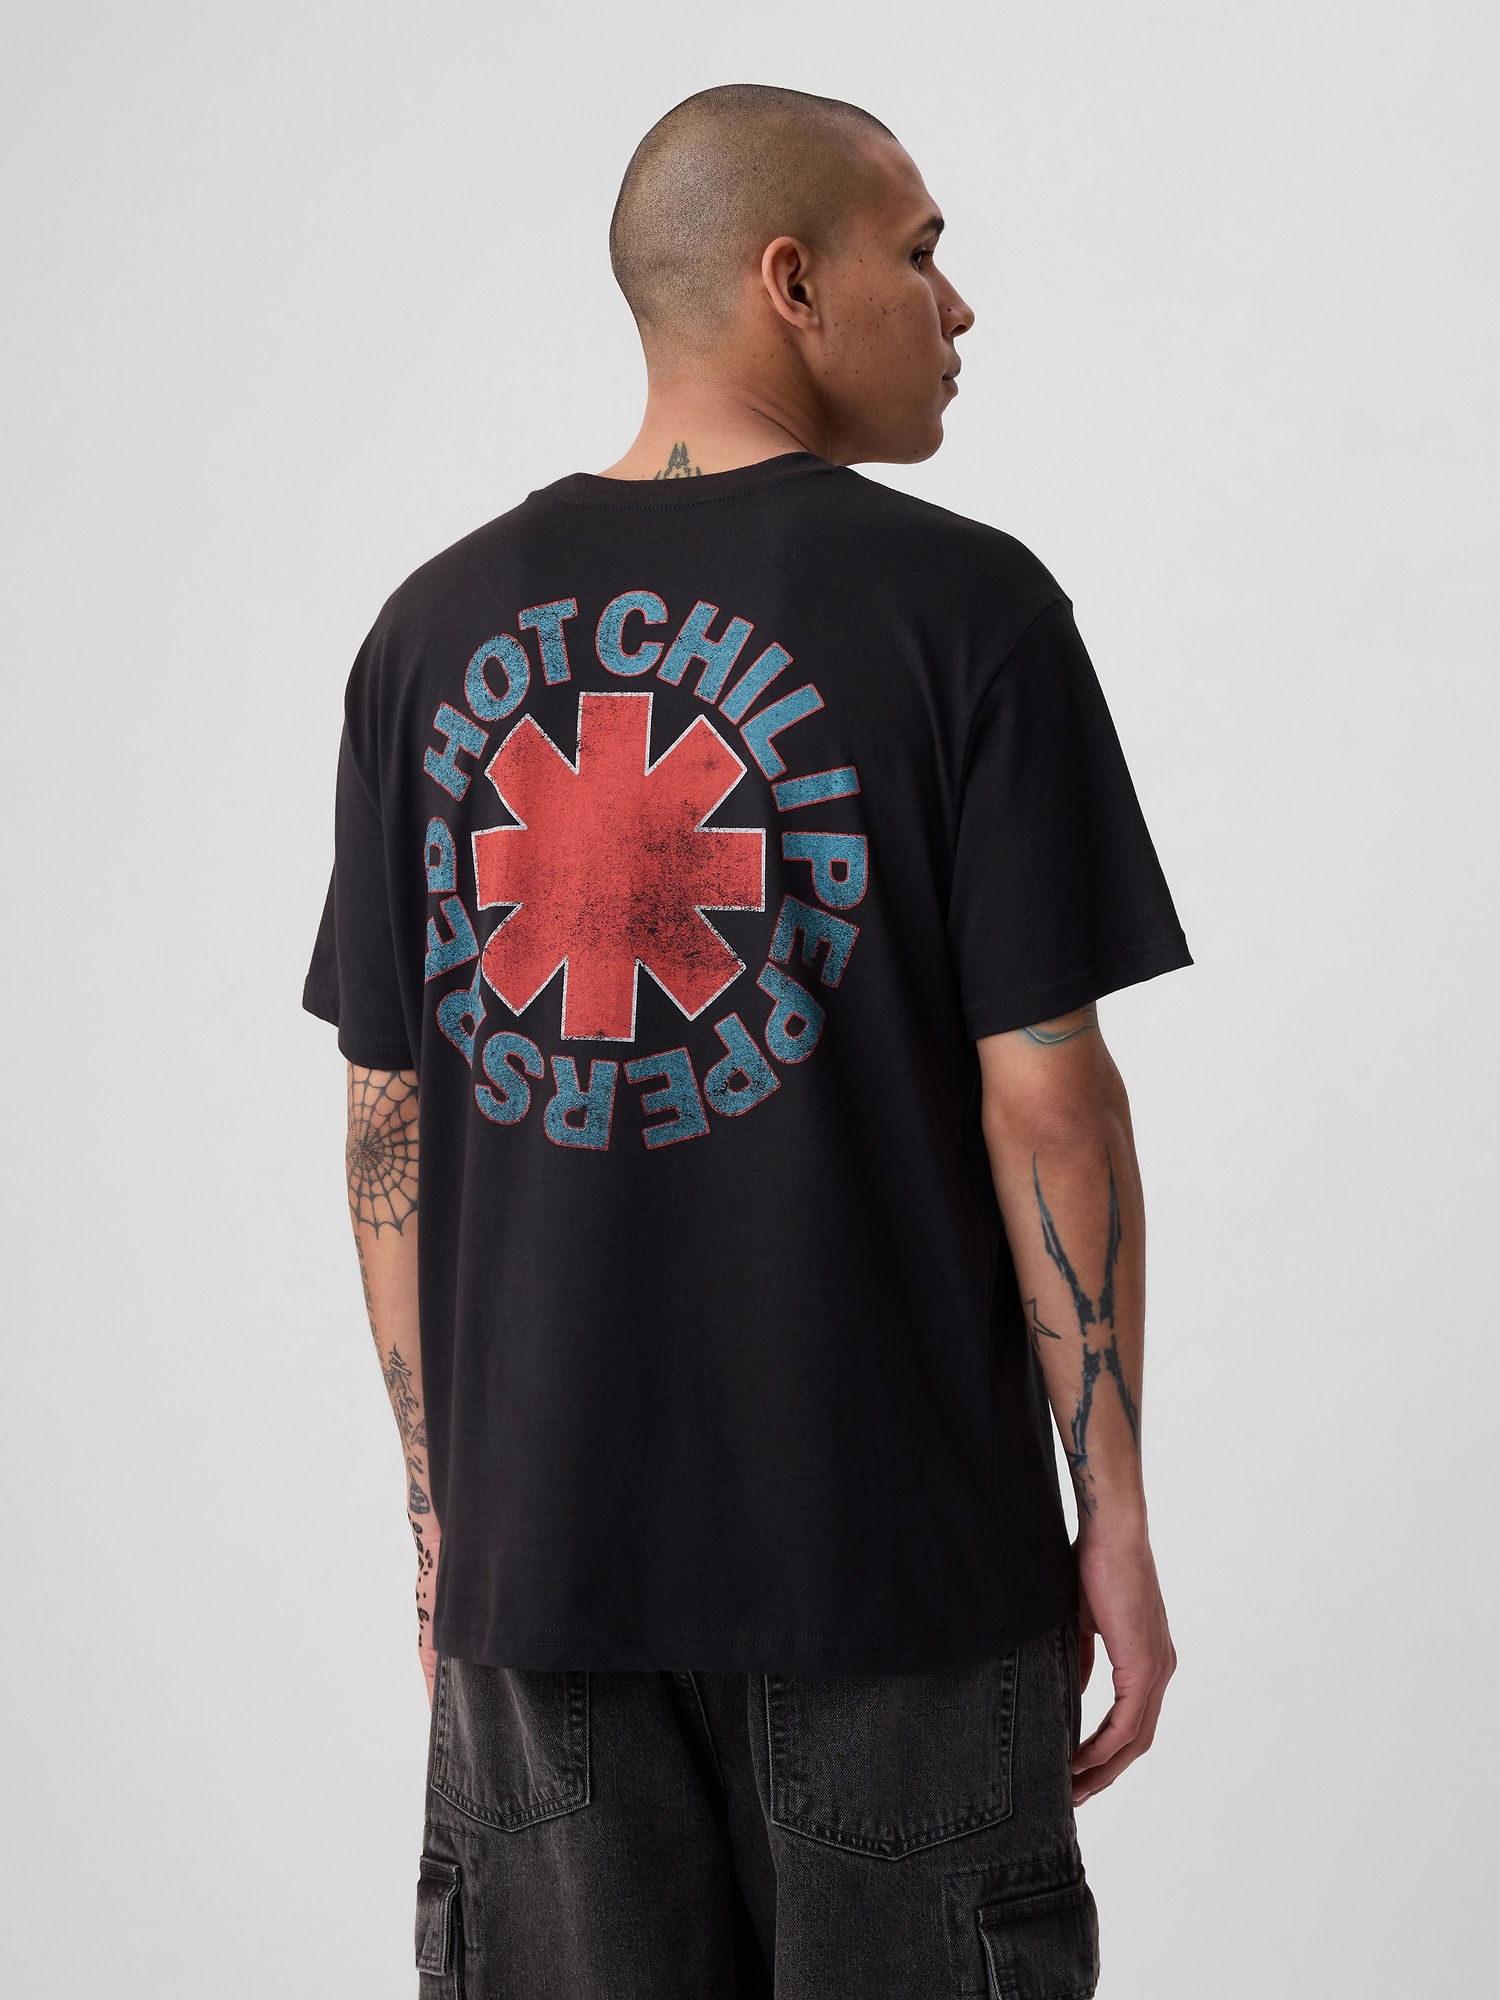 Red Hot Chili Peppers プリントTシャツ(ユニセックス)